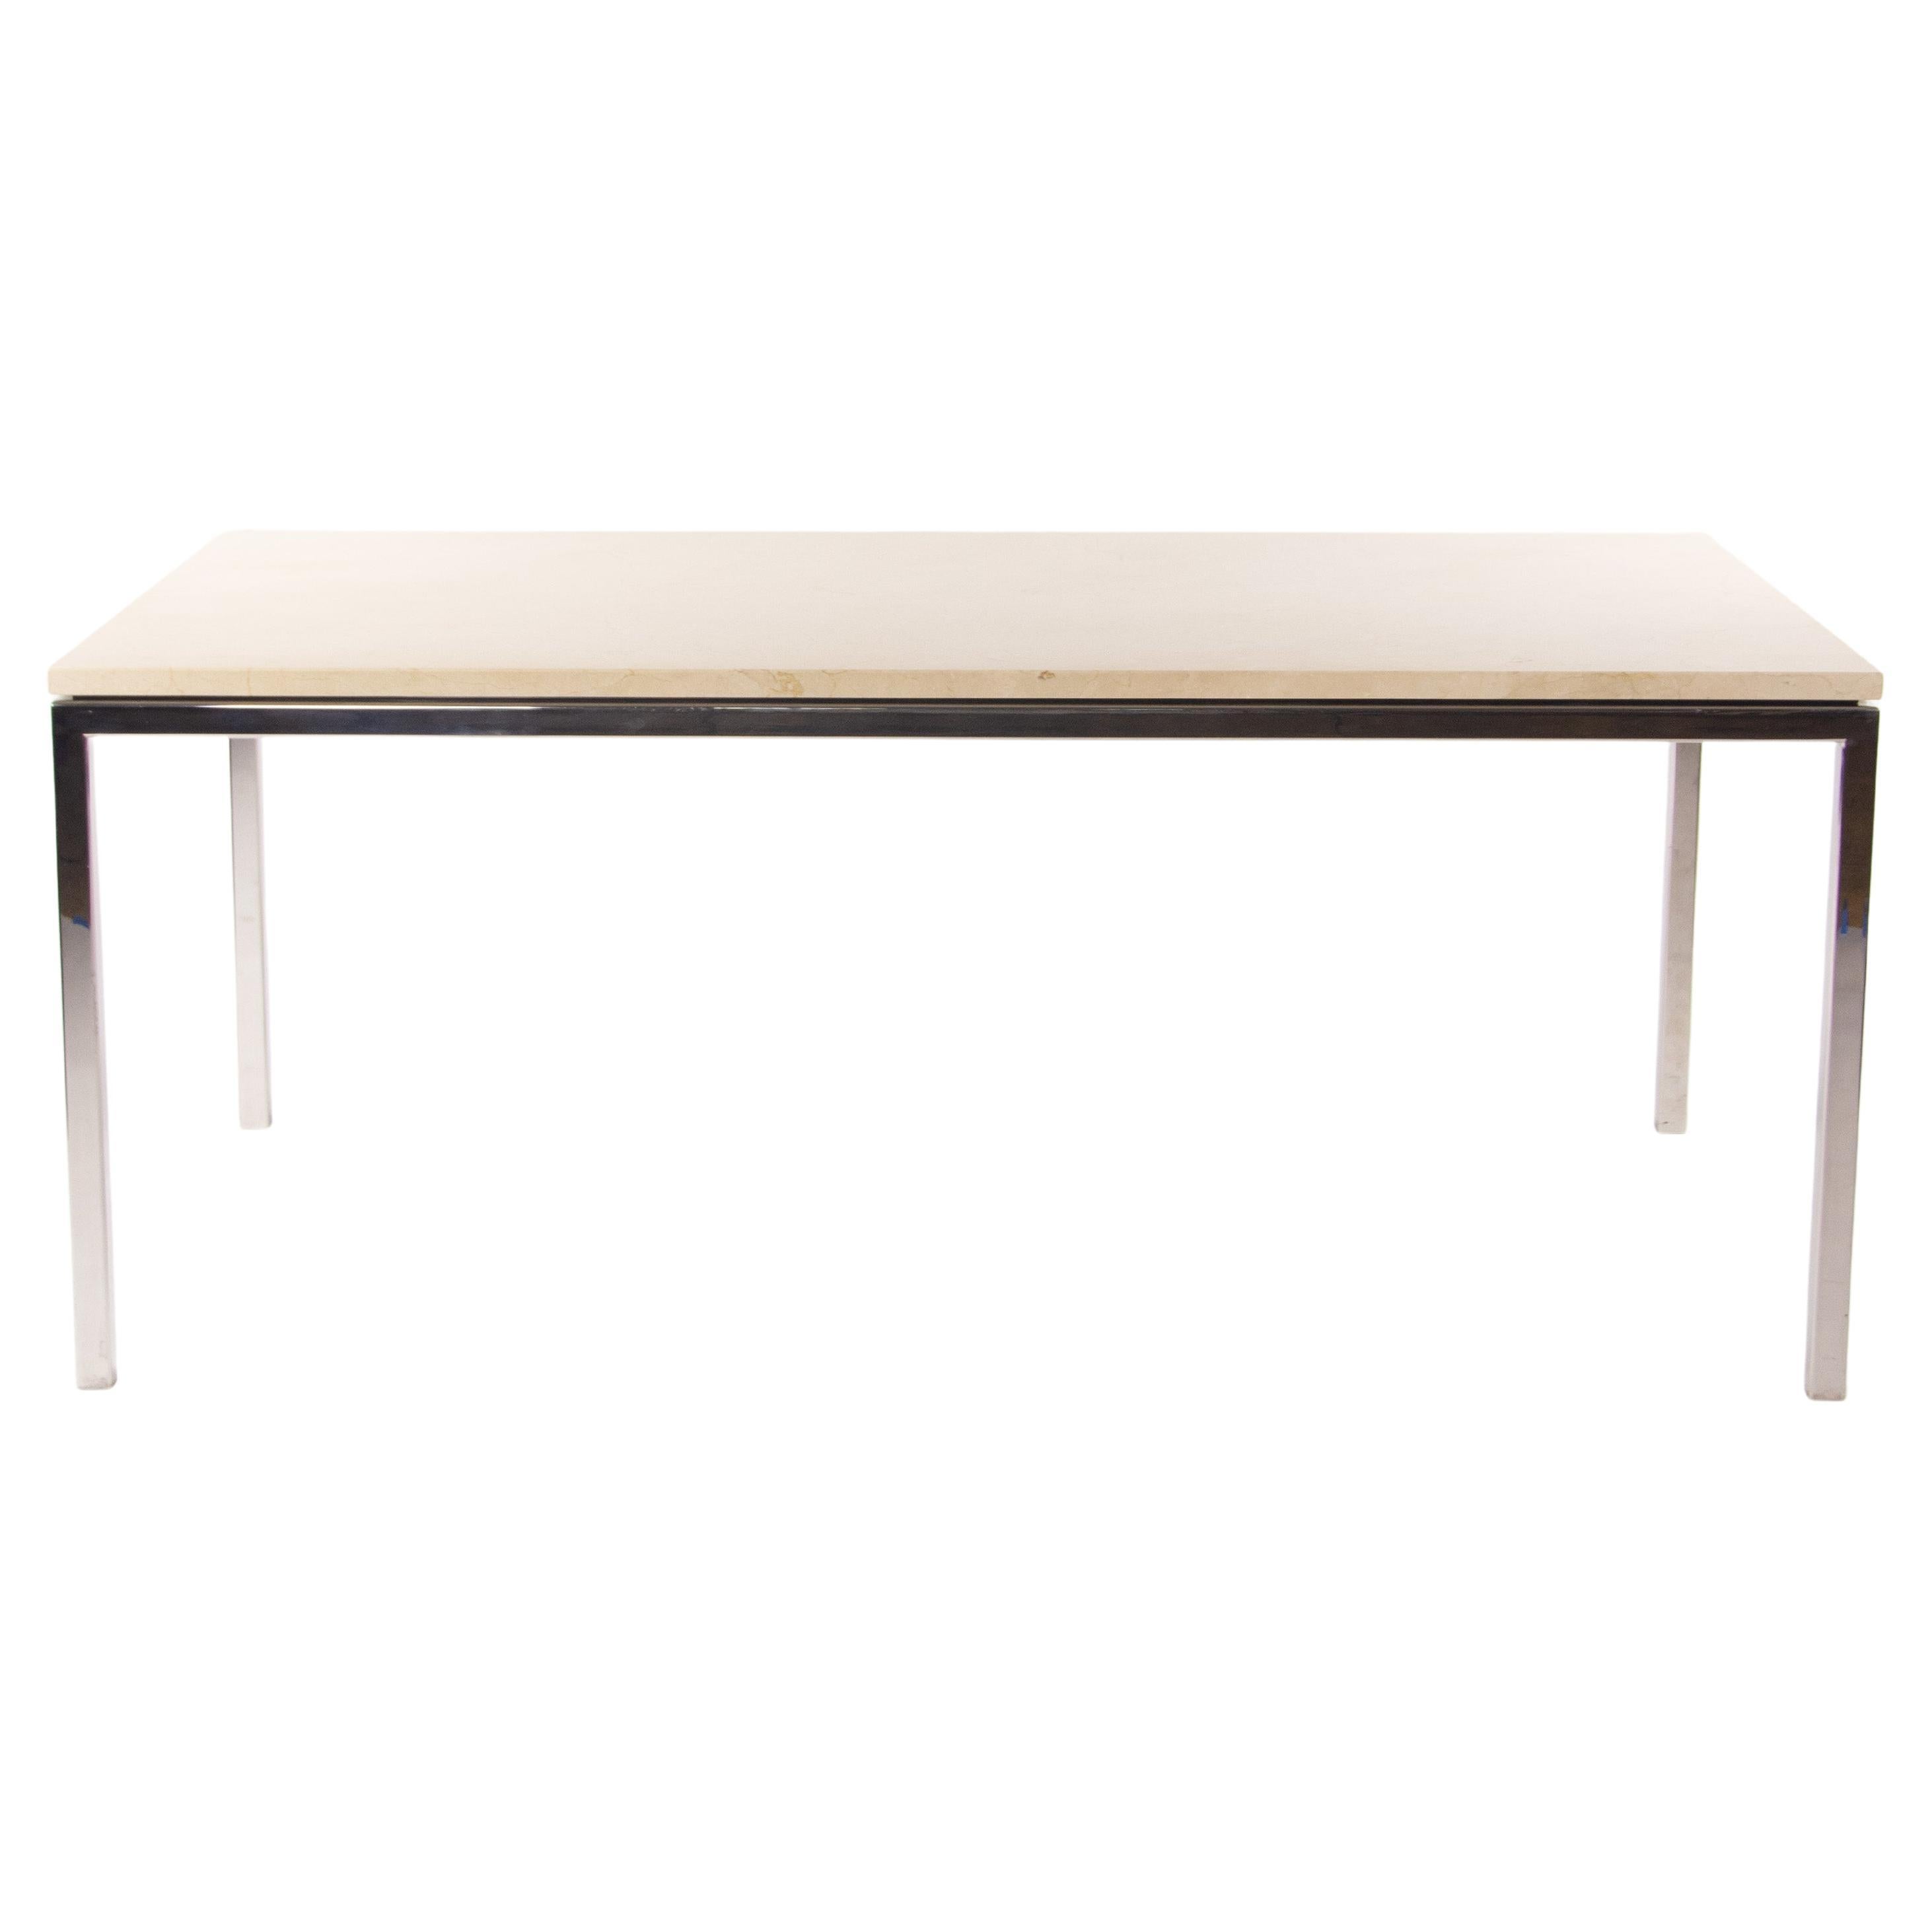 Granite 6x3 ft Meeting Dining Conference Table Beige w/ Base from SOM Project For Sale